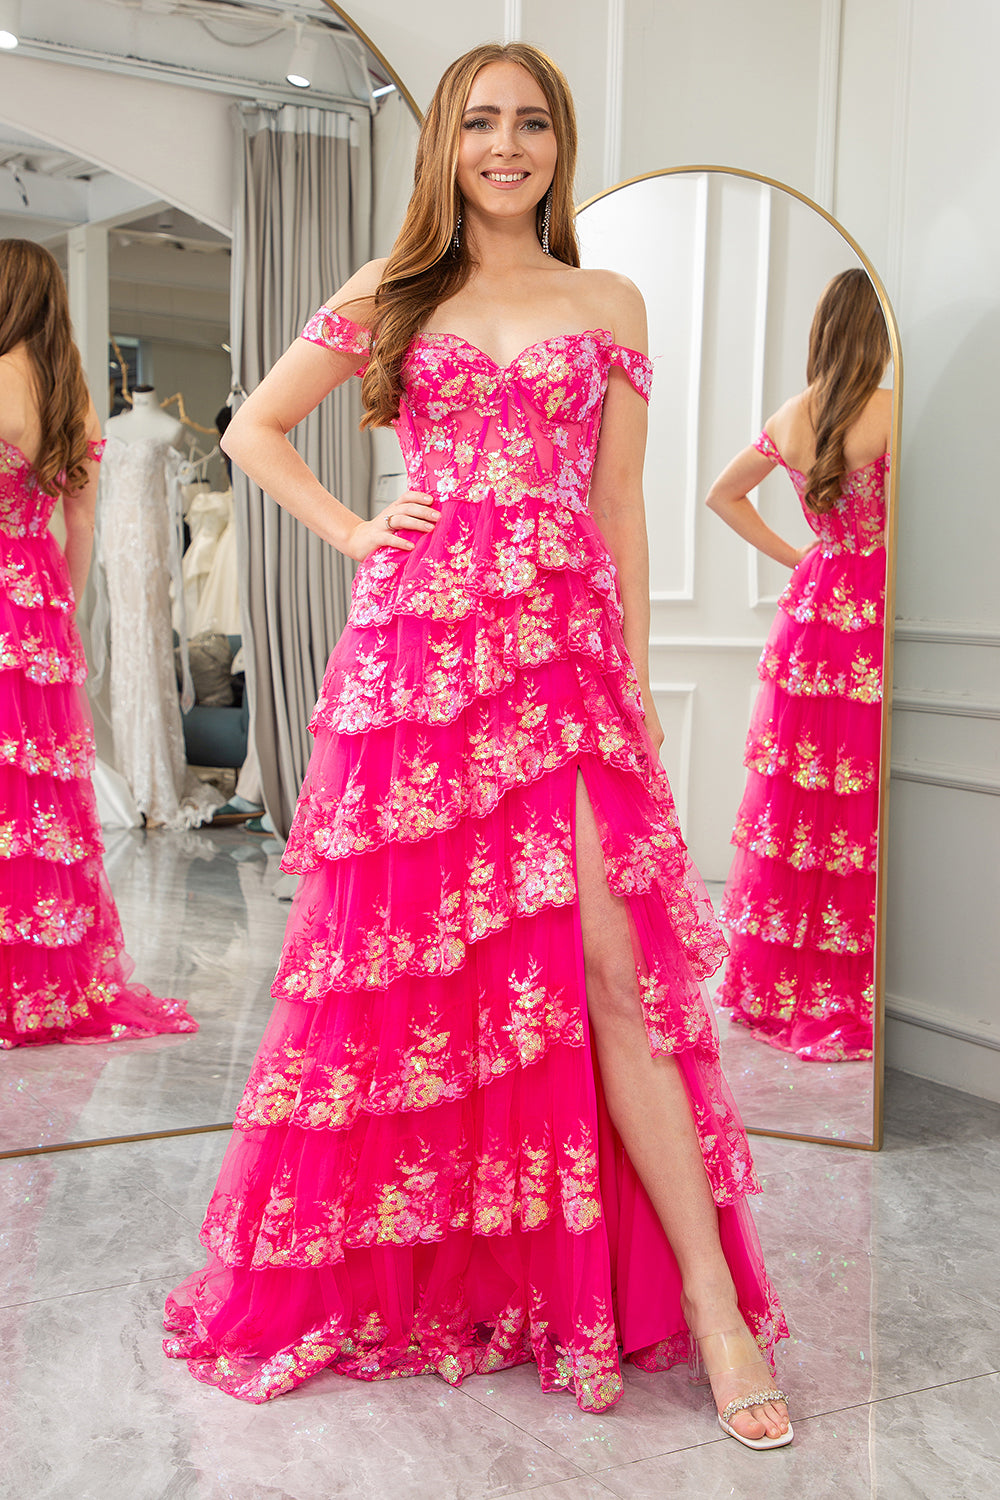 A-line Off The Shoulder Fuchsia Tiered Prom Dress with Sequins